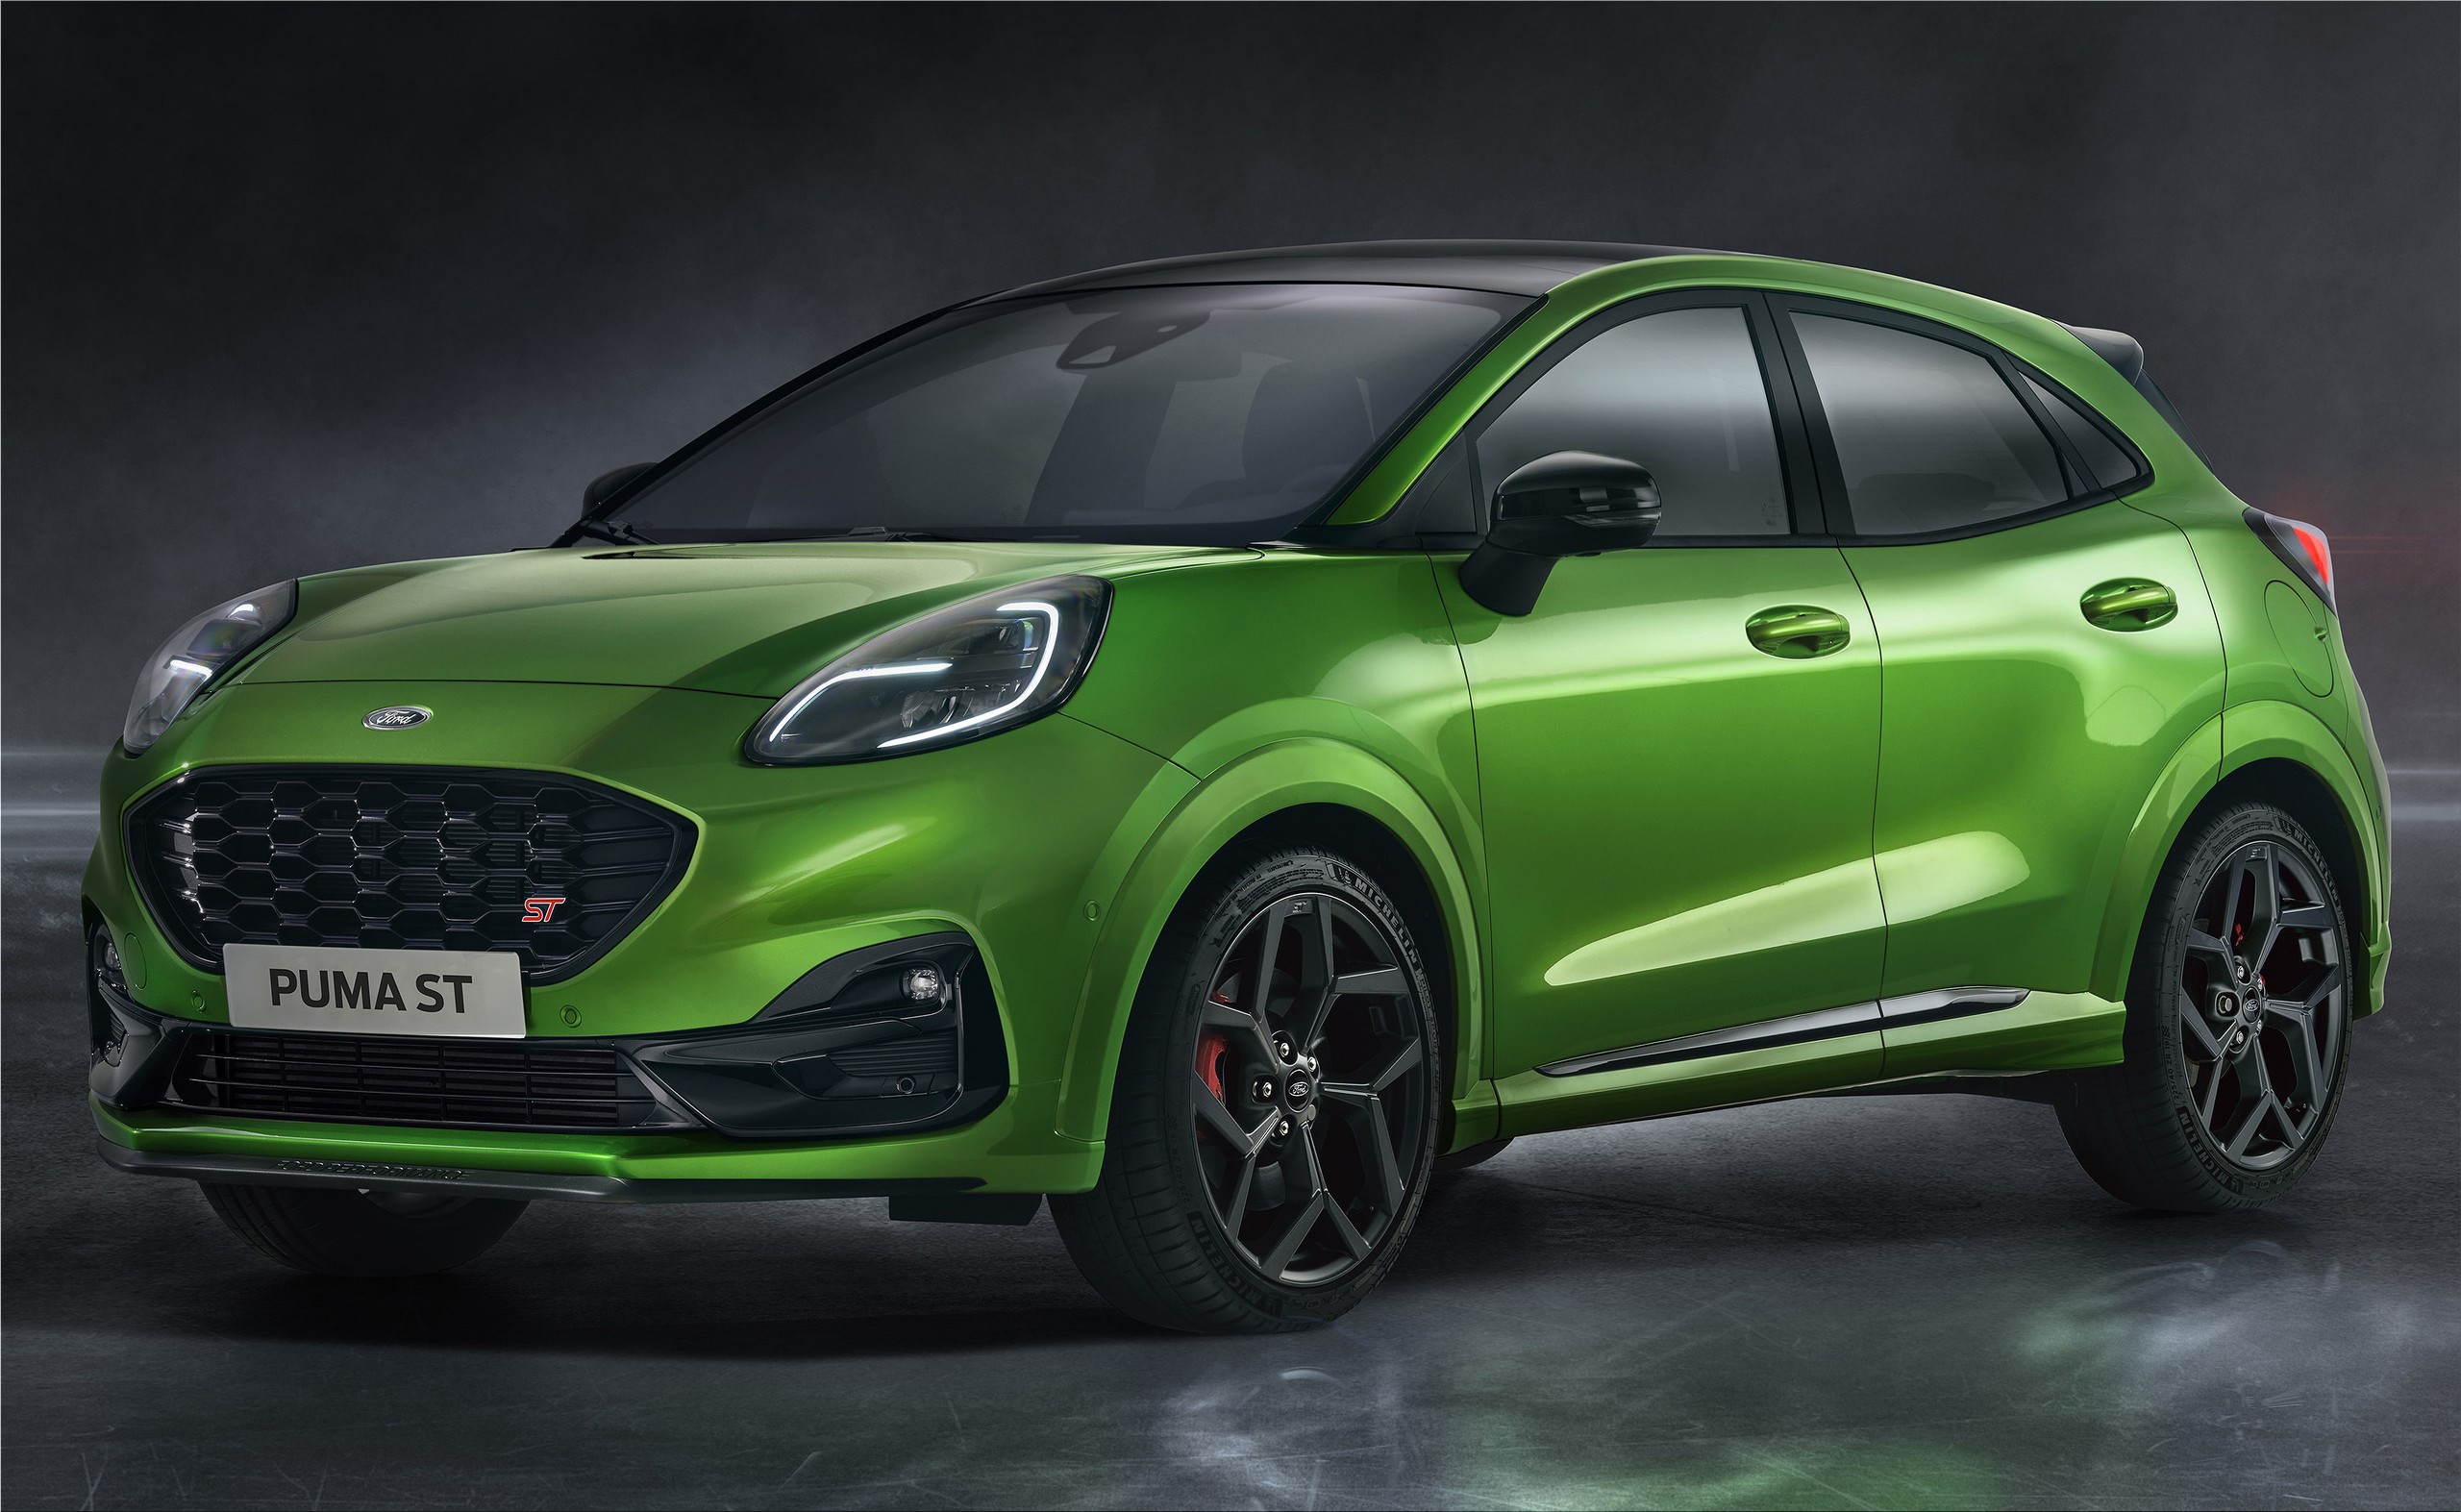 The new Ford Puma ST with 200Hp arrives in Europe Spare Wheel